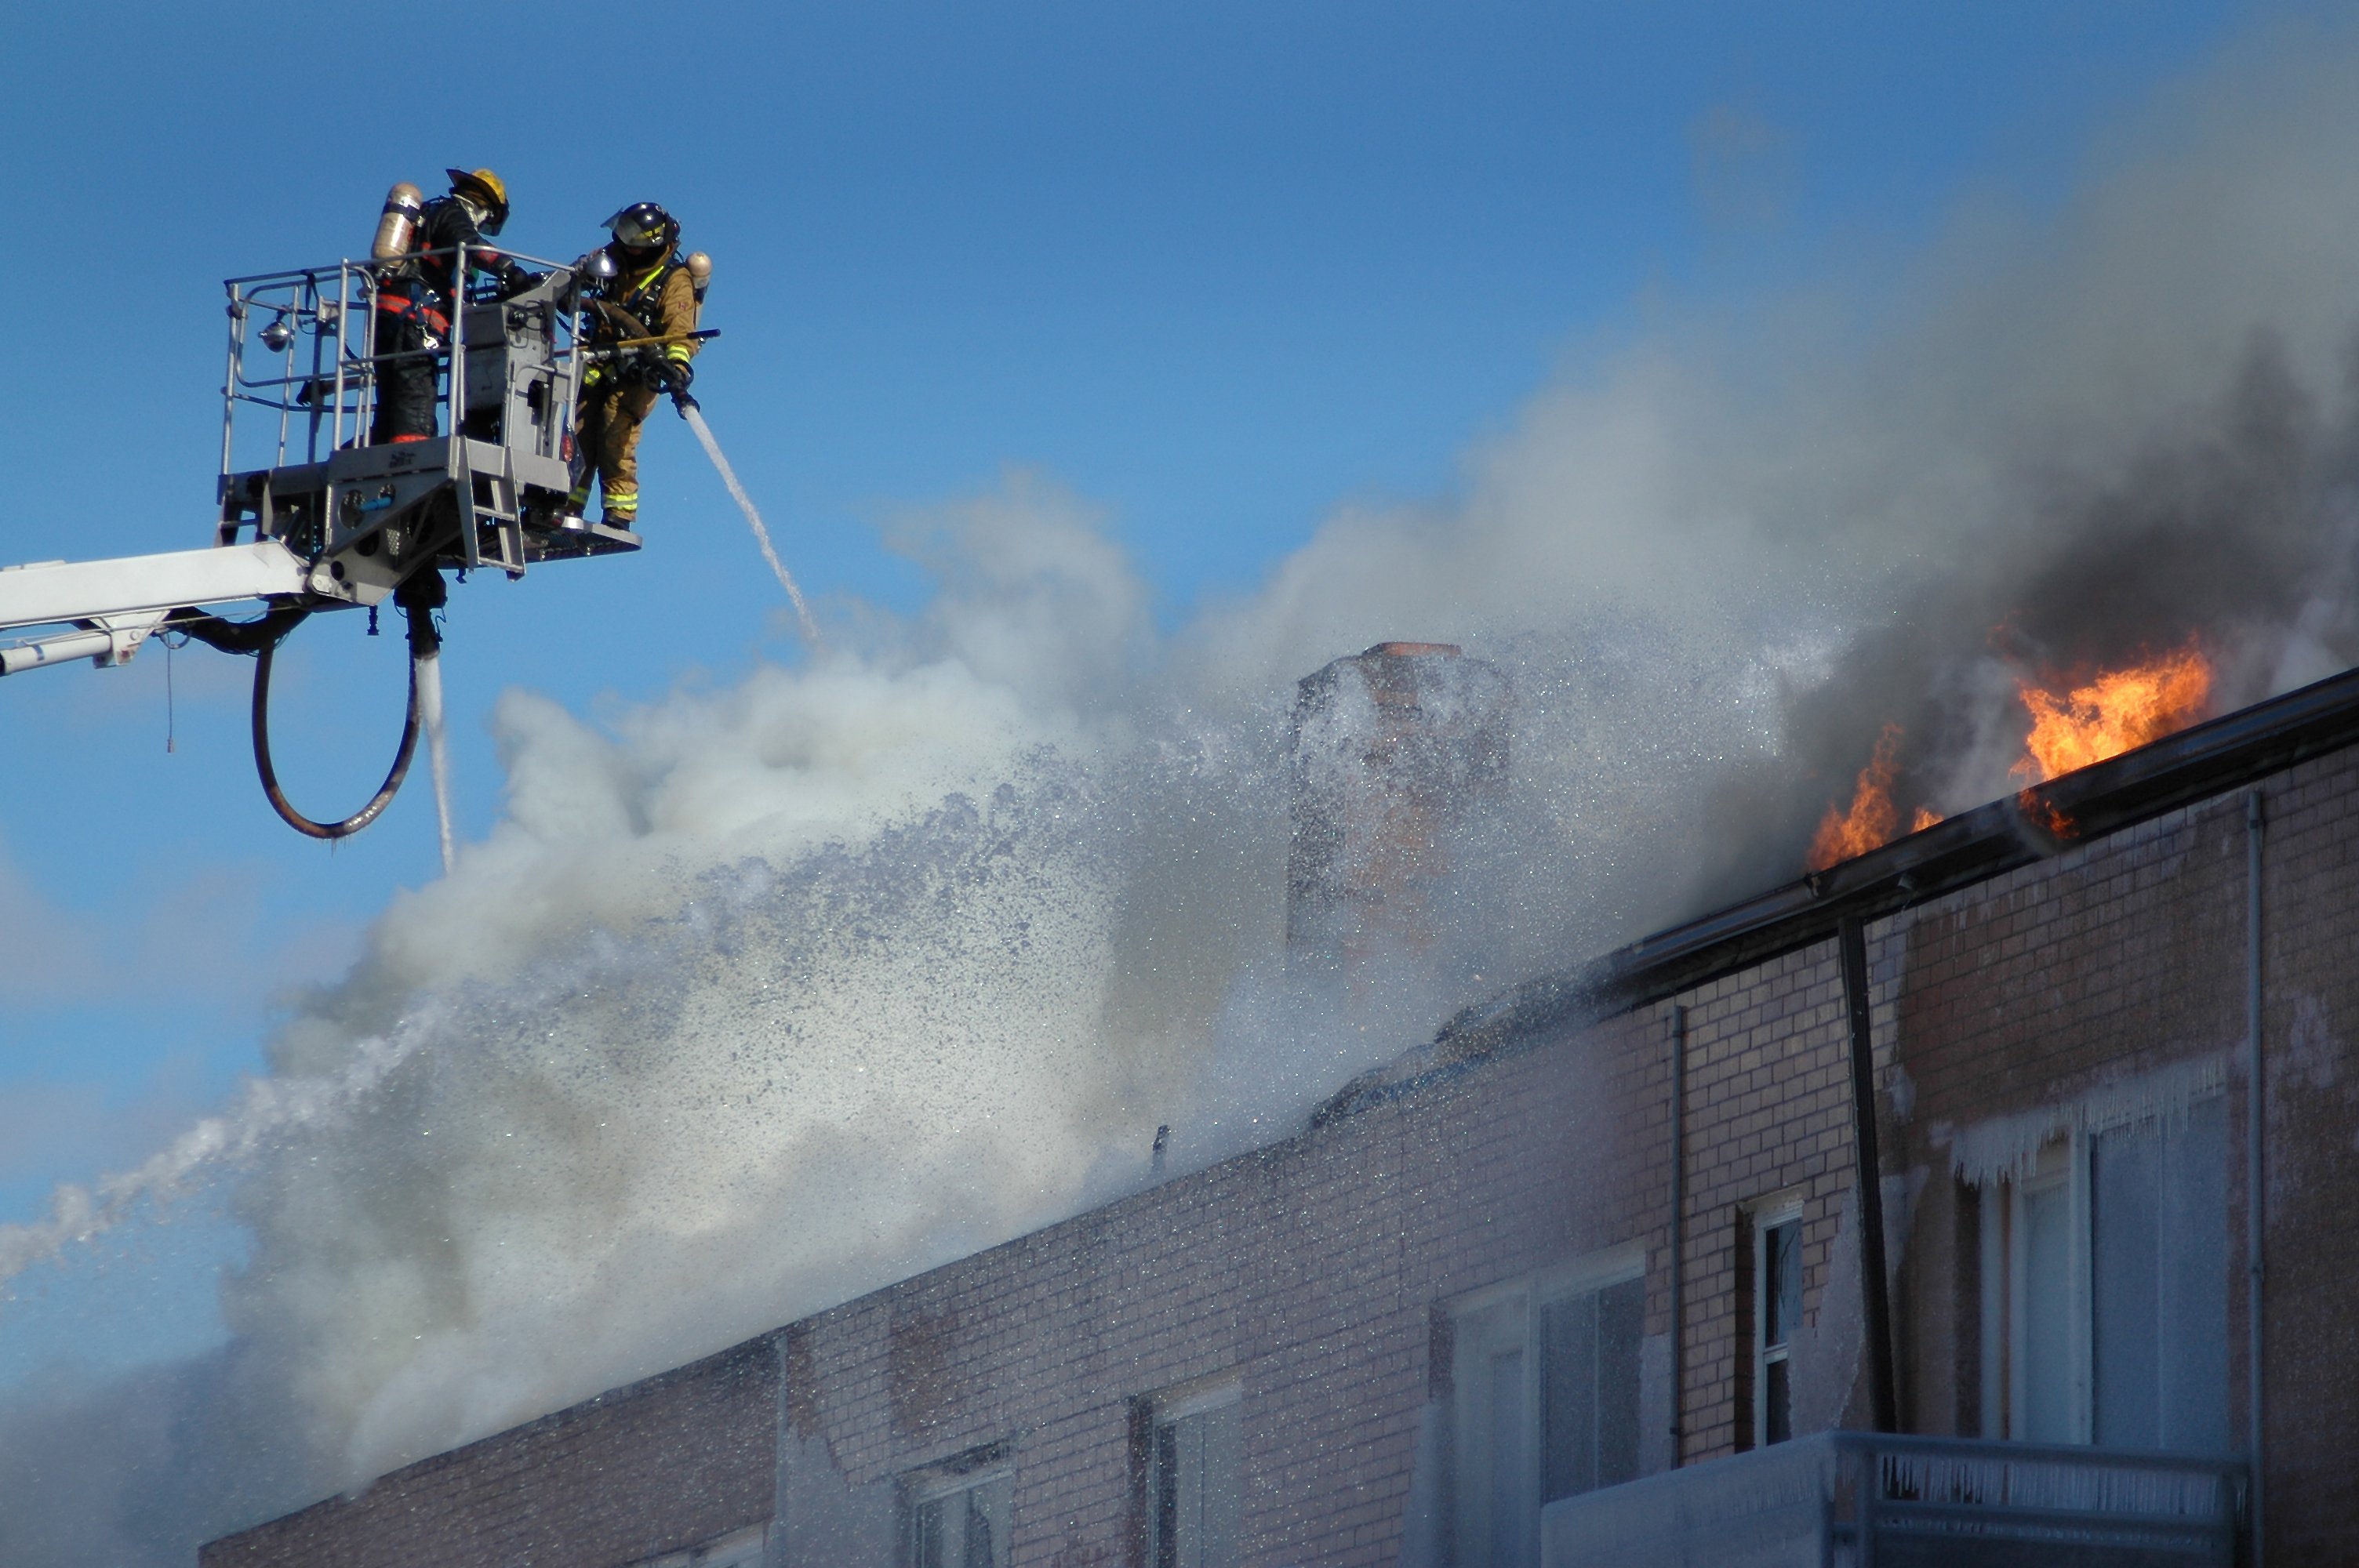 Firefighters battling fire on roof of apartment